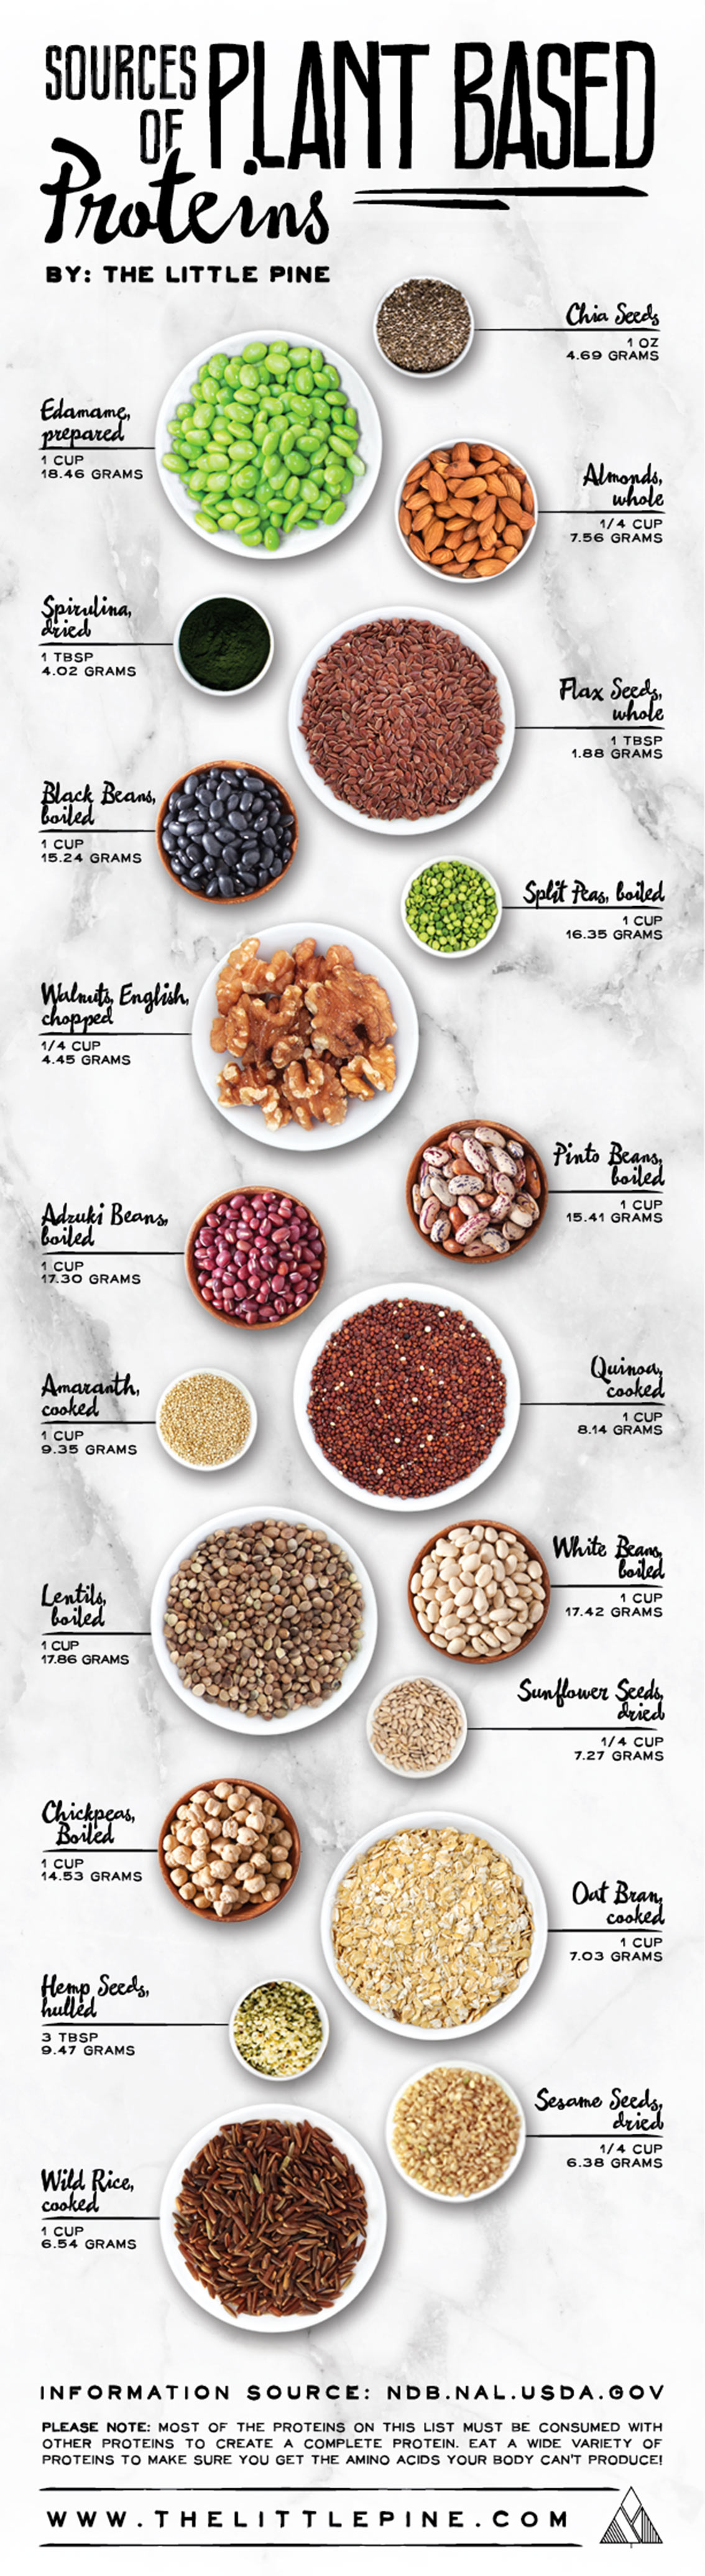 Best Sources of Plant Based Protein - Vegan Infographic